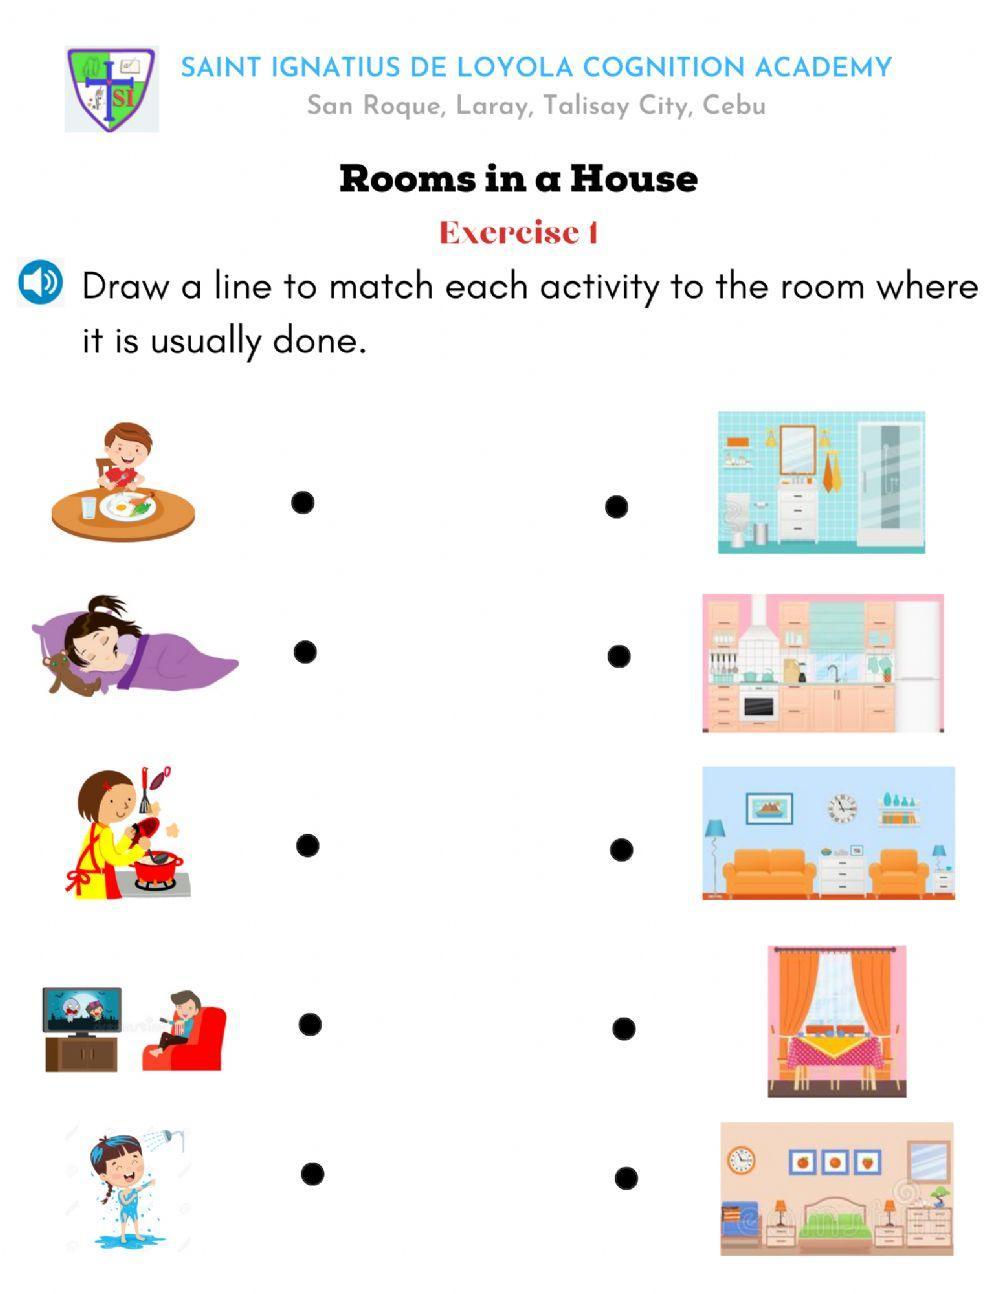 Rooms in a House Exercise 1